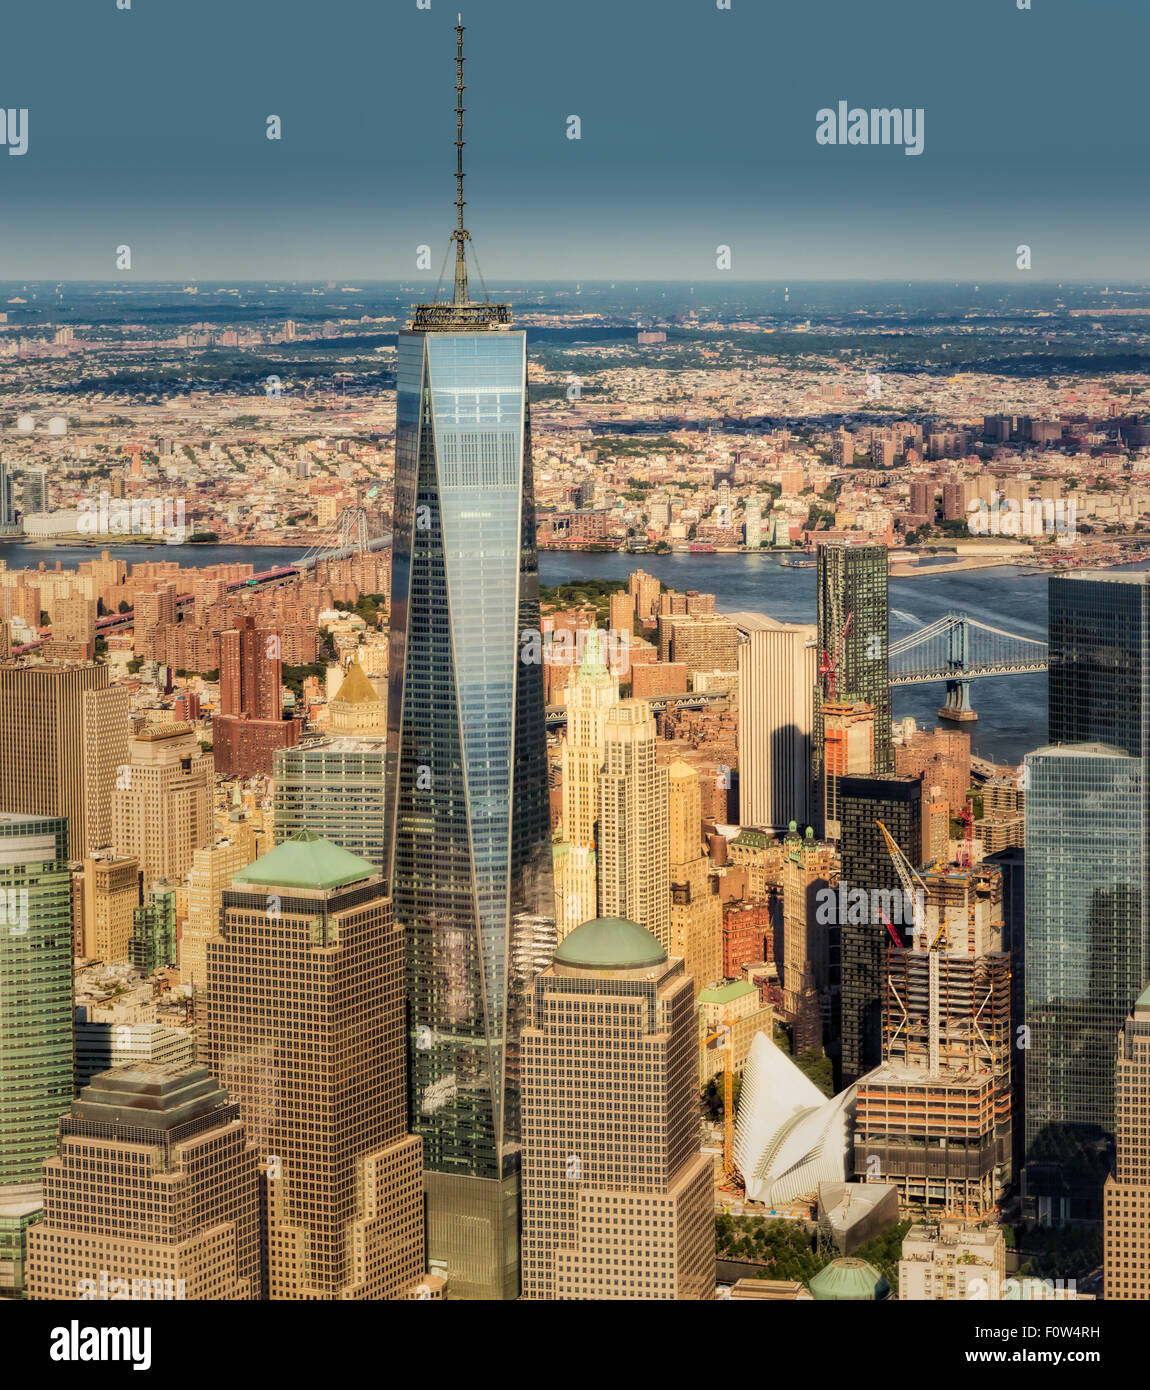 Aerial close-up view of One World Trade Center WTC commonly referred to as the Freedom Tower. Stock Photo